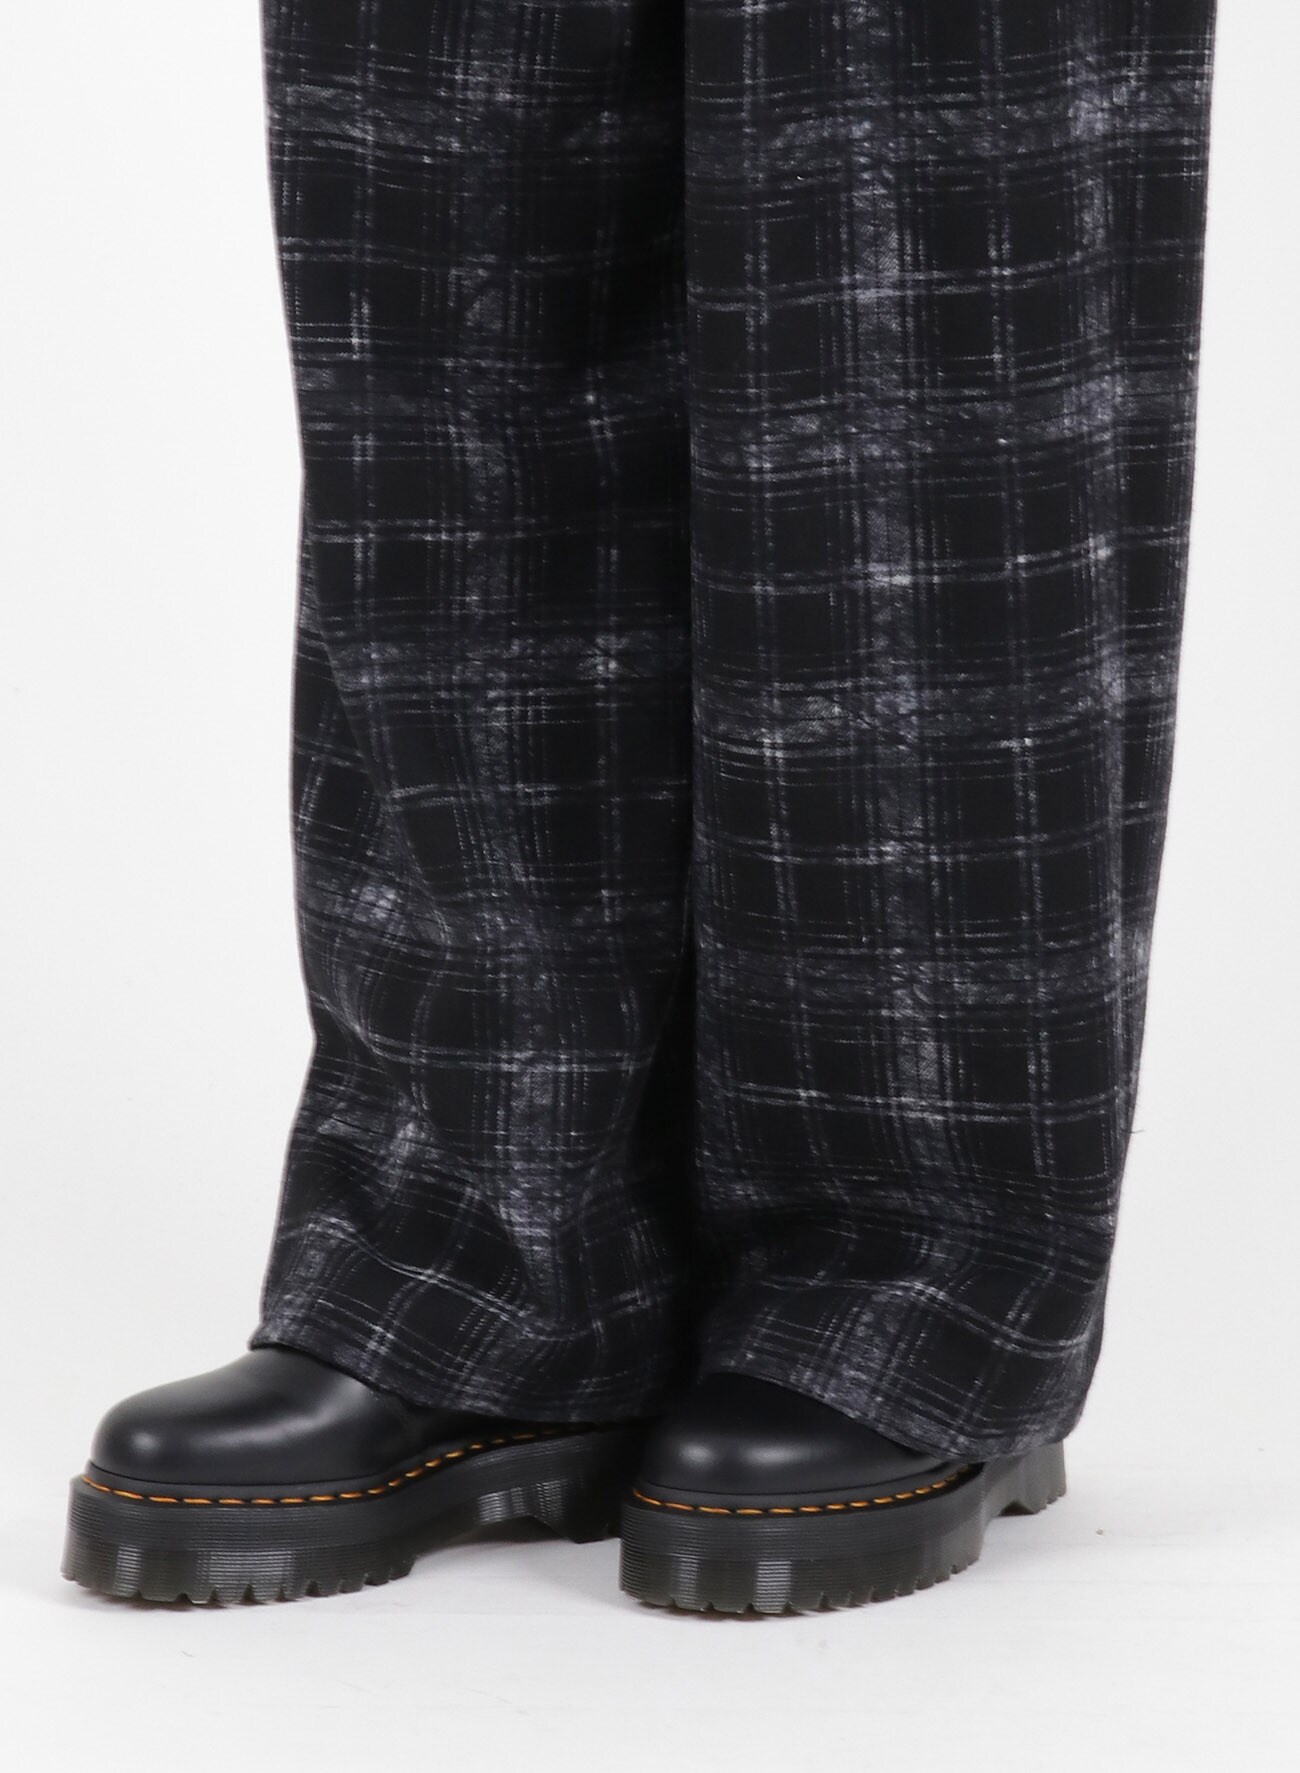 CARDED WOOL CHECK UNEVEN PRINT JUMPSUIT